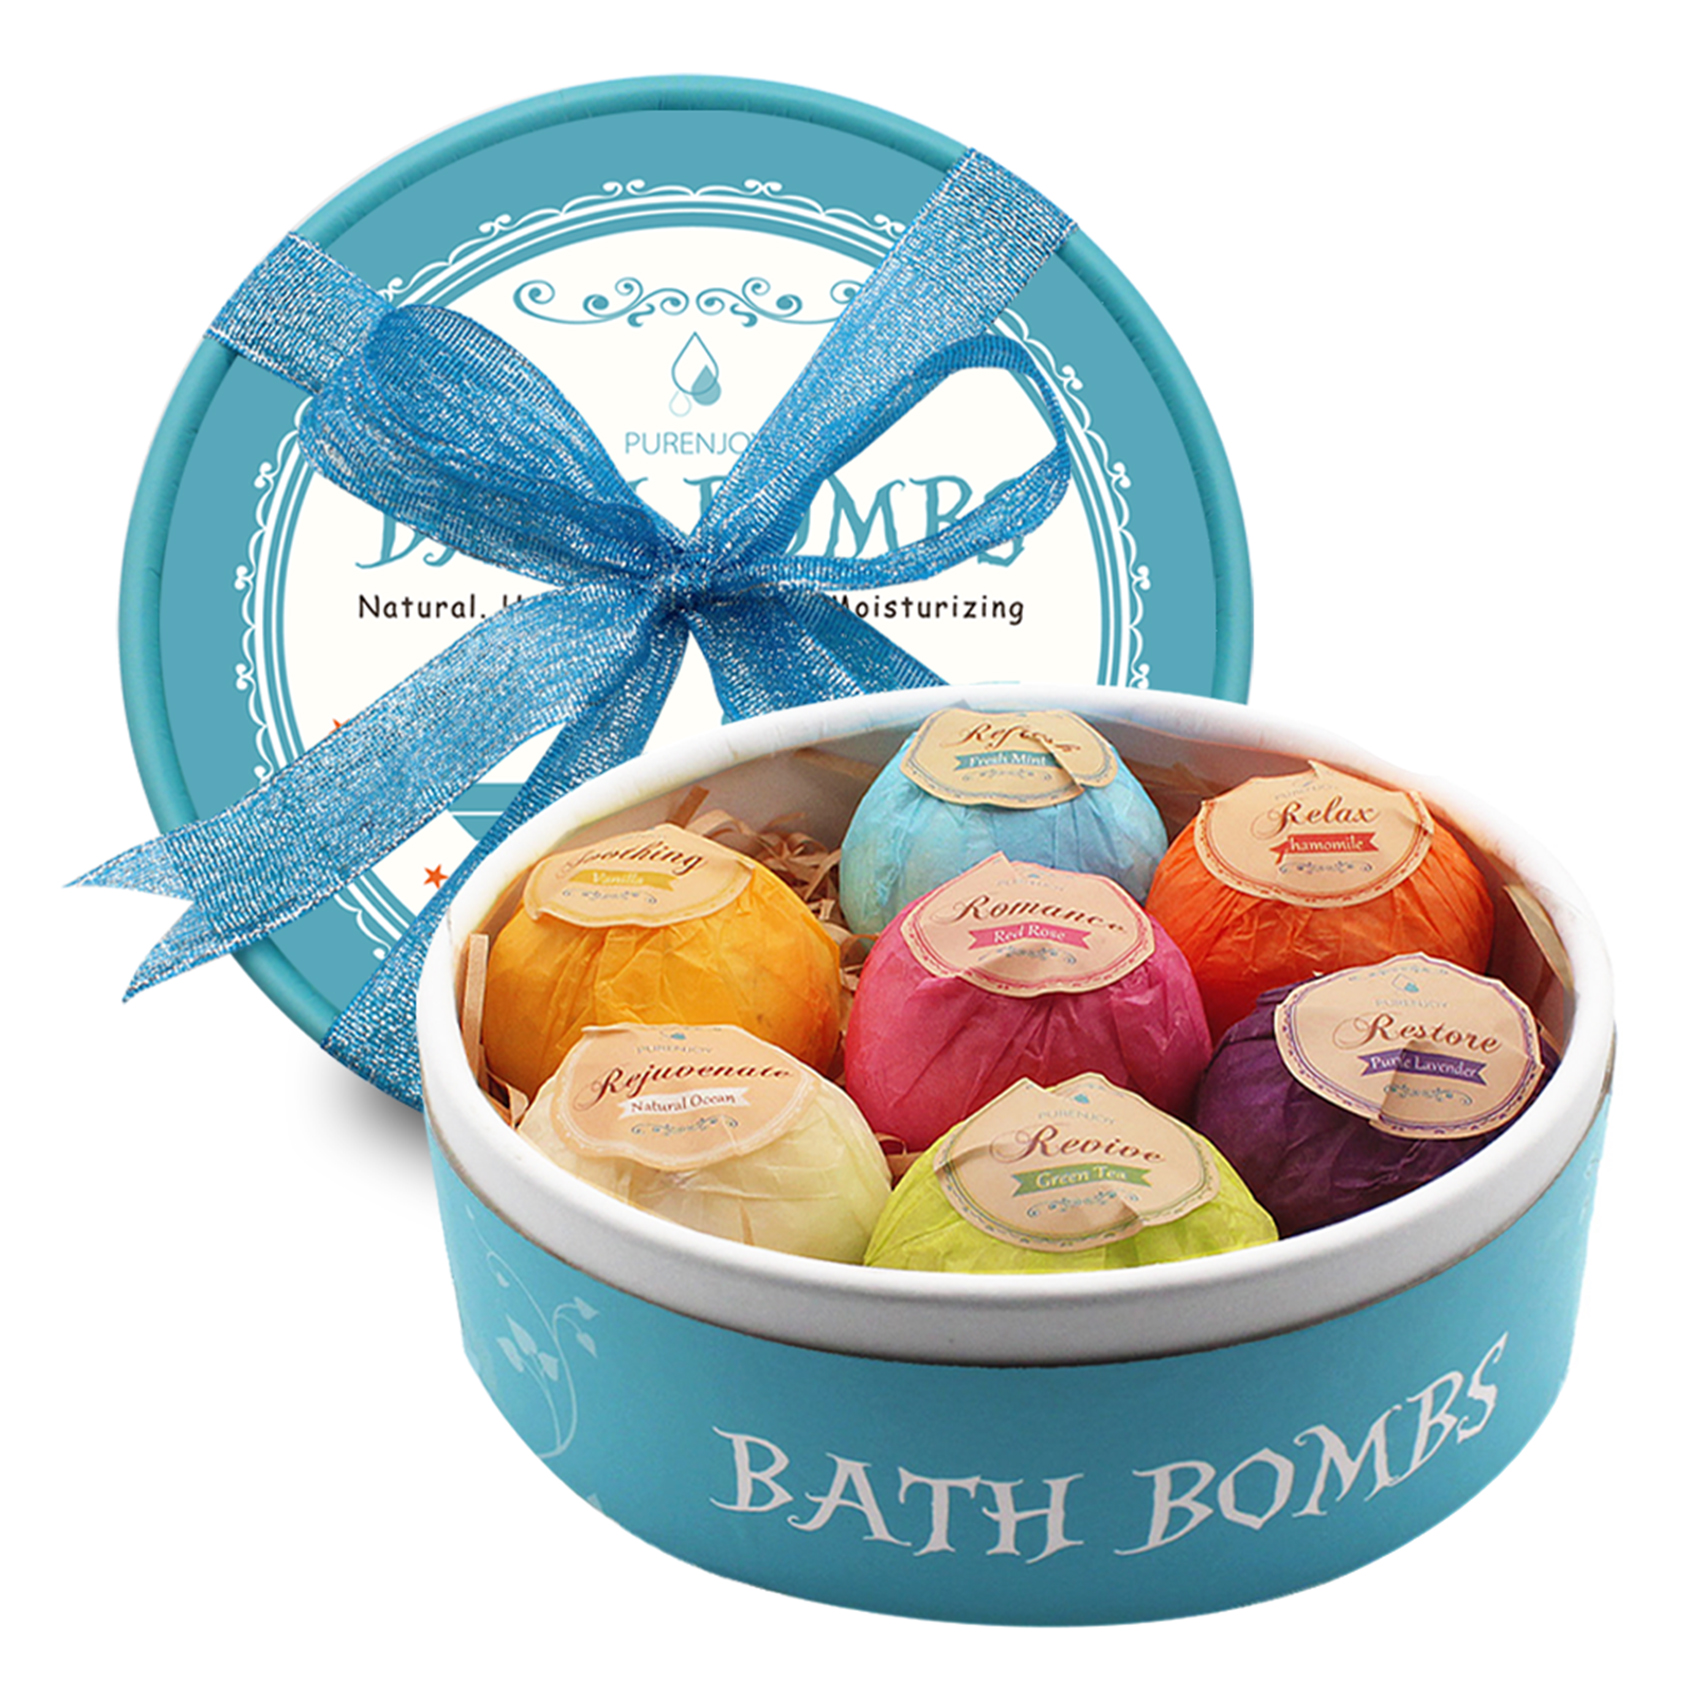 Aofmee Bath Bombs, 7 Bath Bombs for Women, Handmade Bathbombs for Kids Girls, Mothers Day Gifts for Mom, Spa Relaxation Gifts for Her, Birthday Valentines Christmas Gifts for Women Who Have Everything